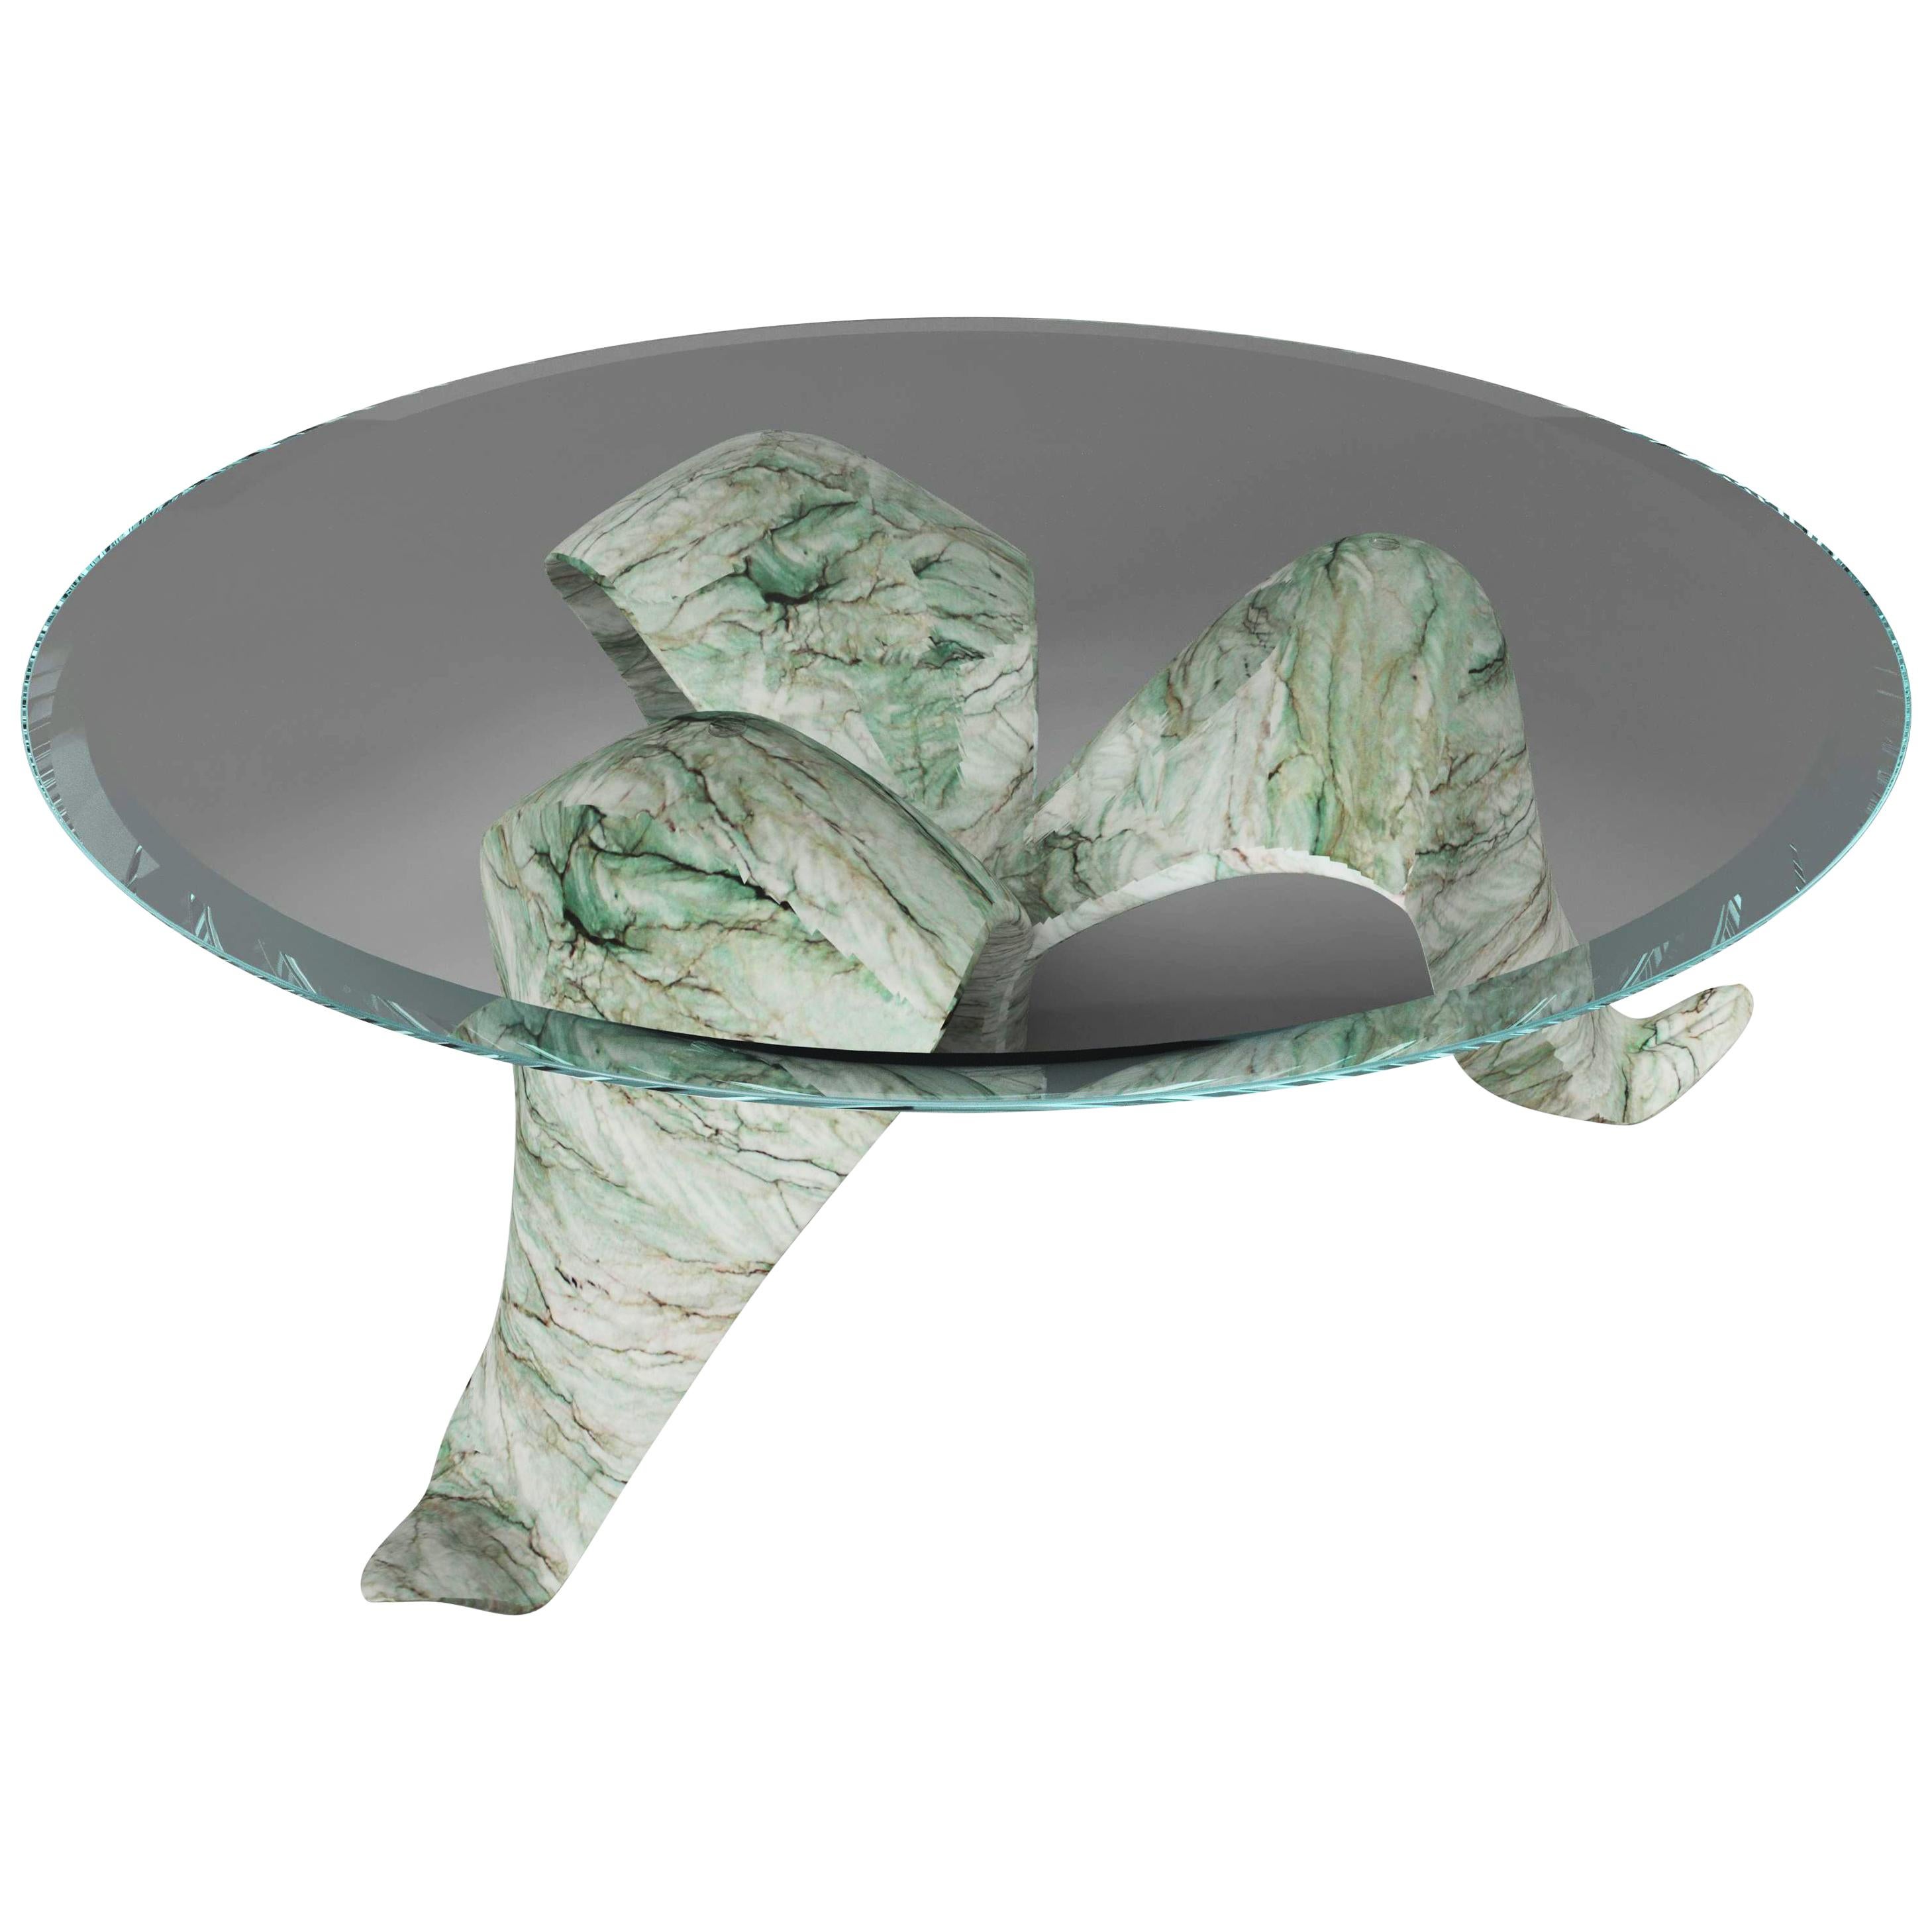 "The Diamond Leaf" Center Table ft. Sculptured Green Marble and Glass